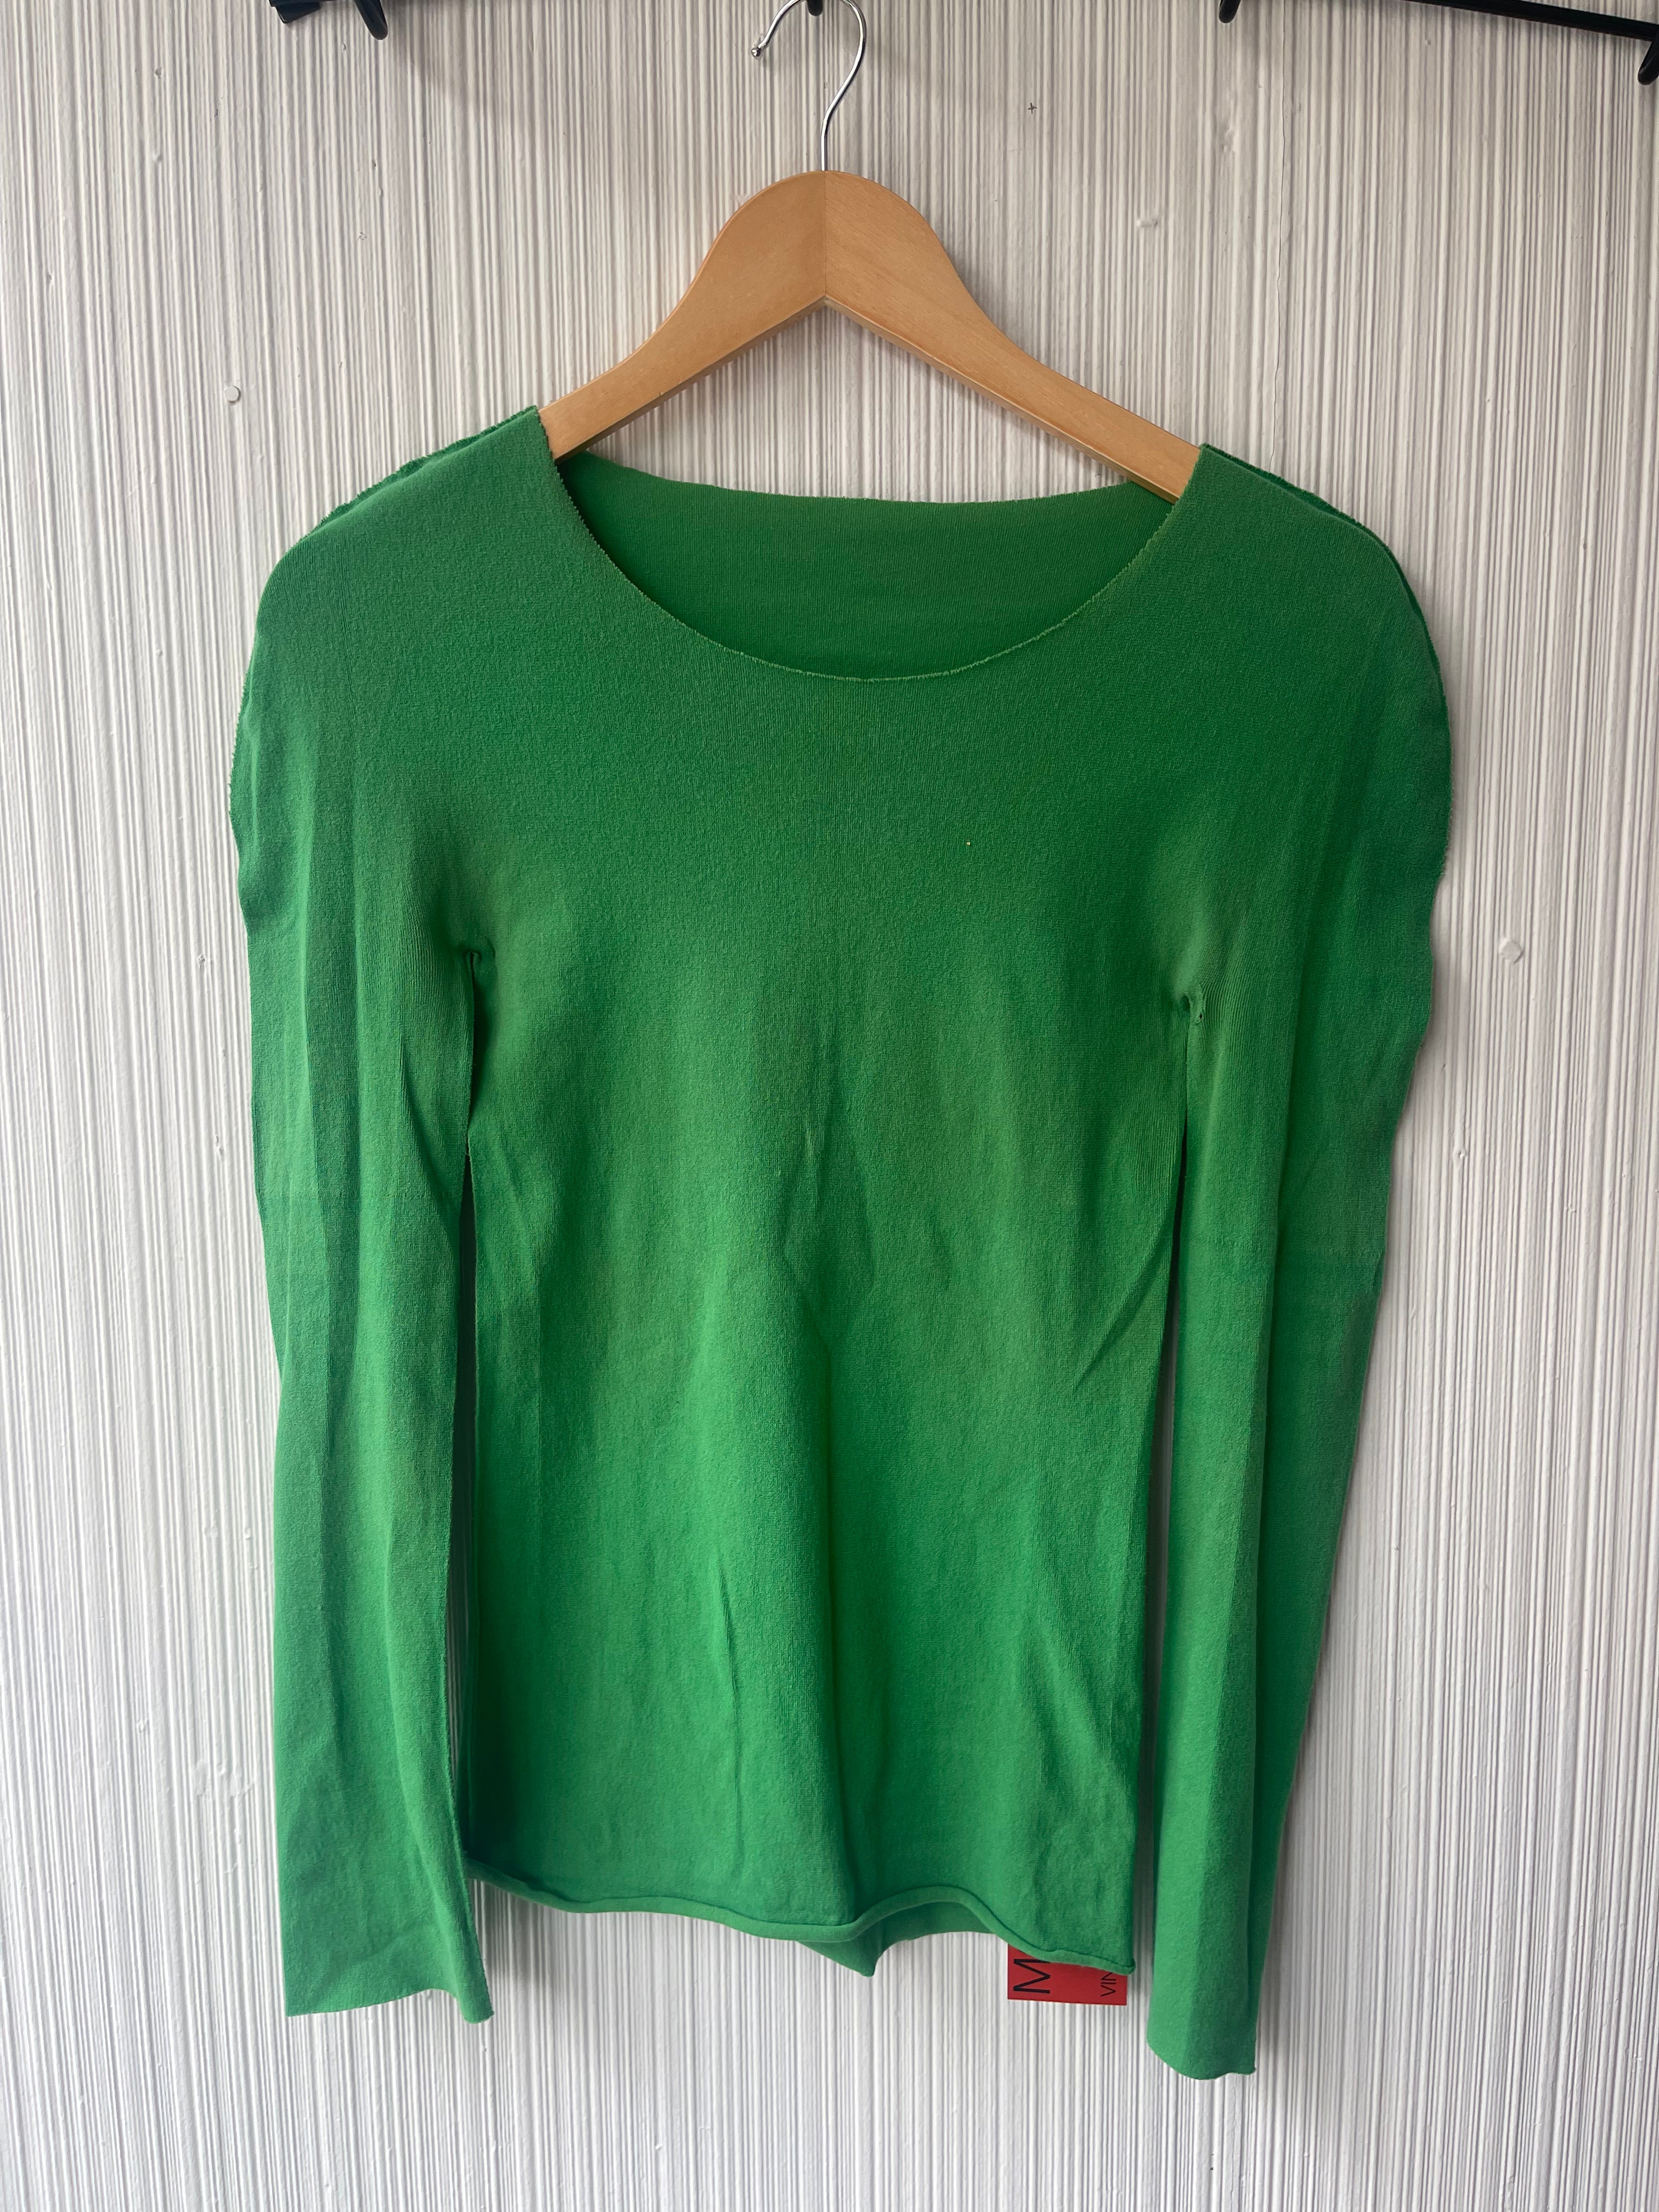 Issey Miyake APOC green woven net neck top